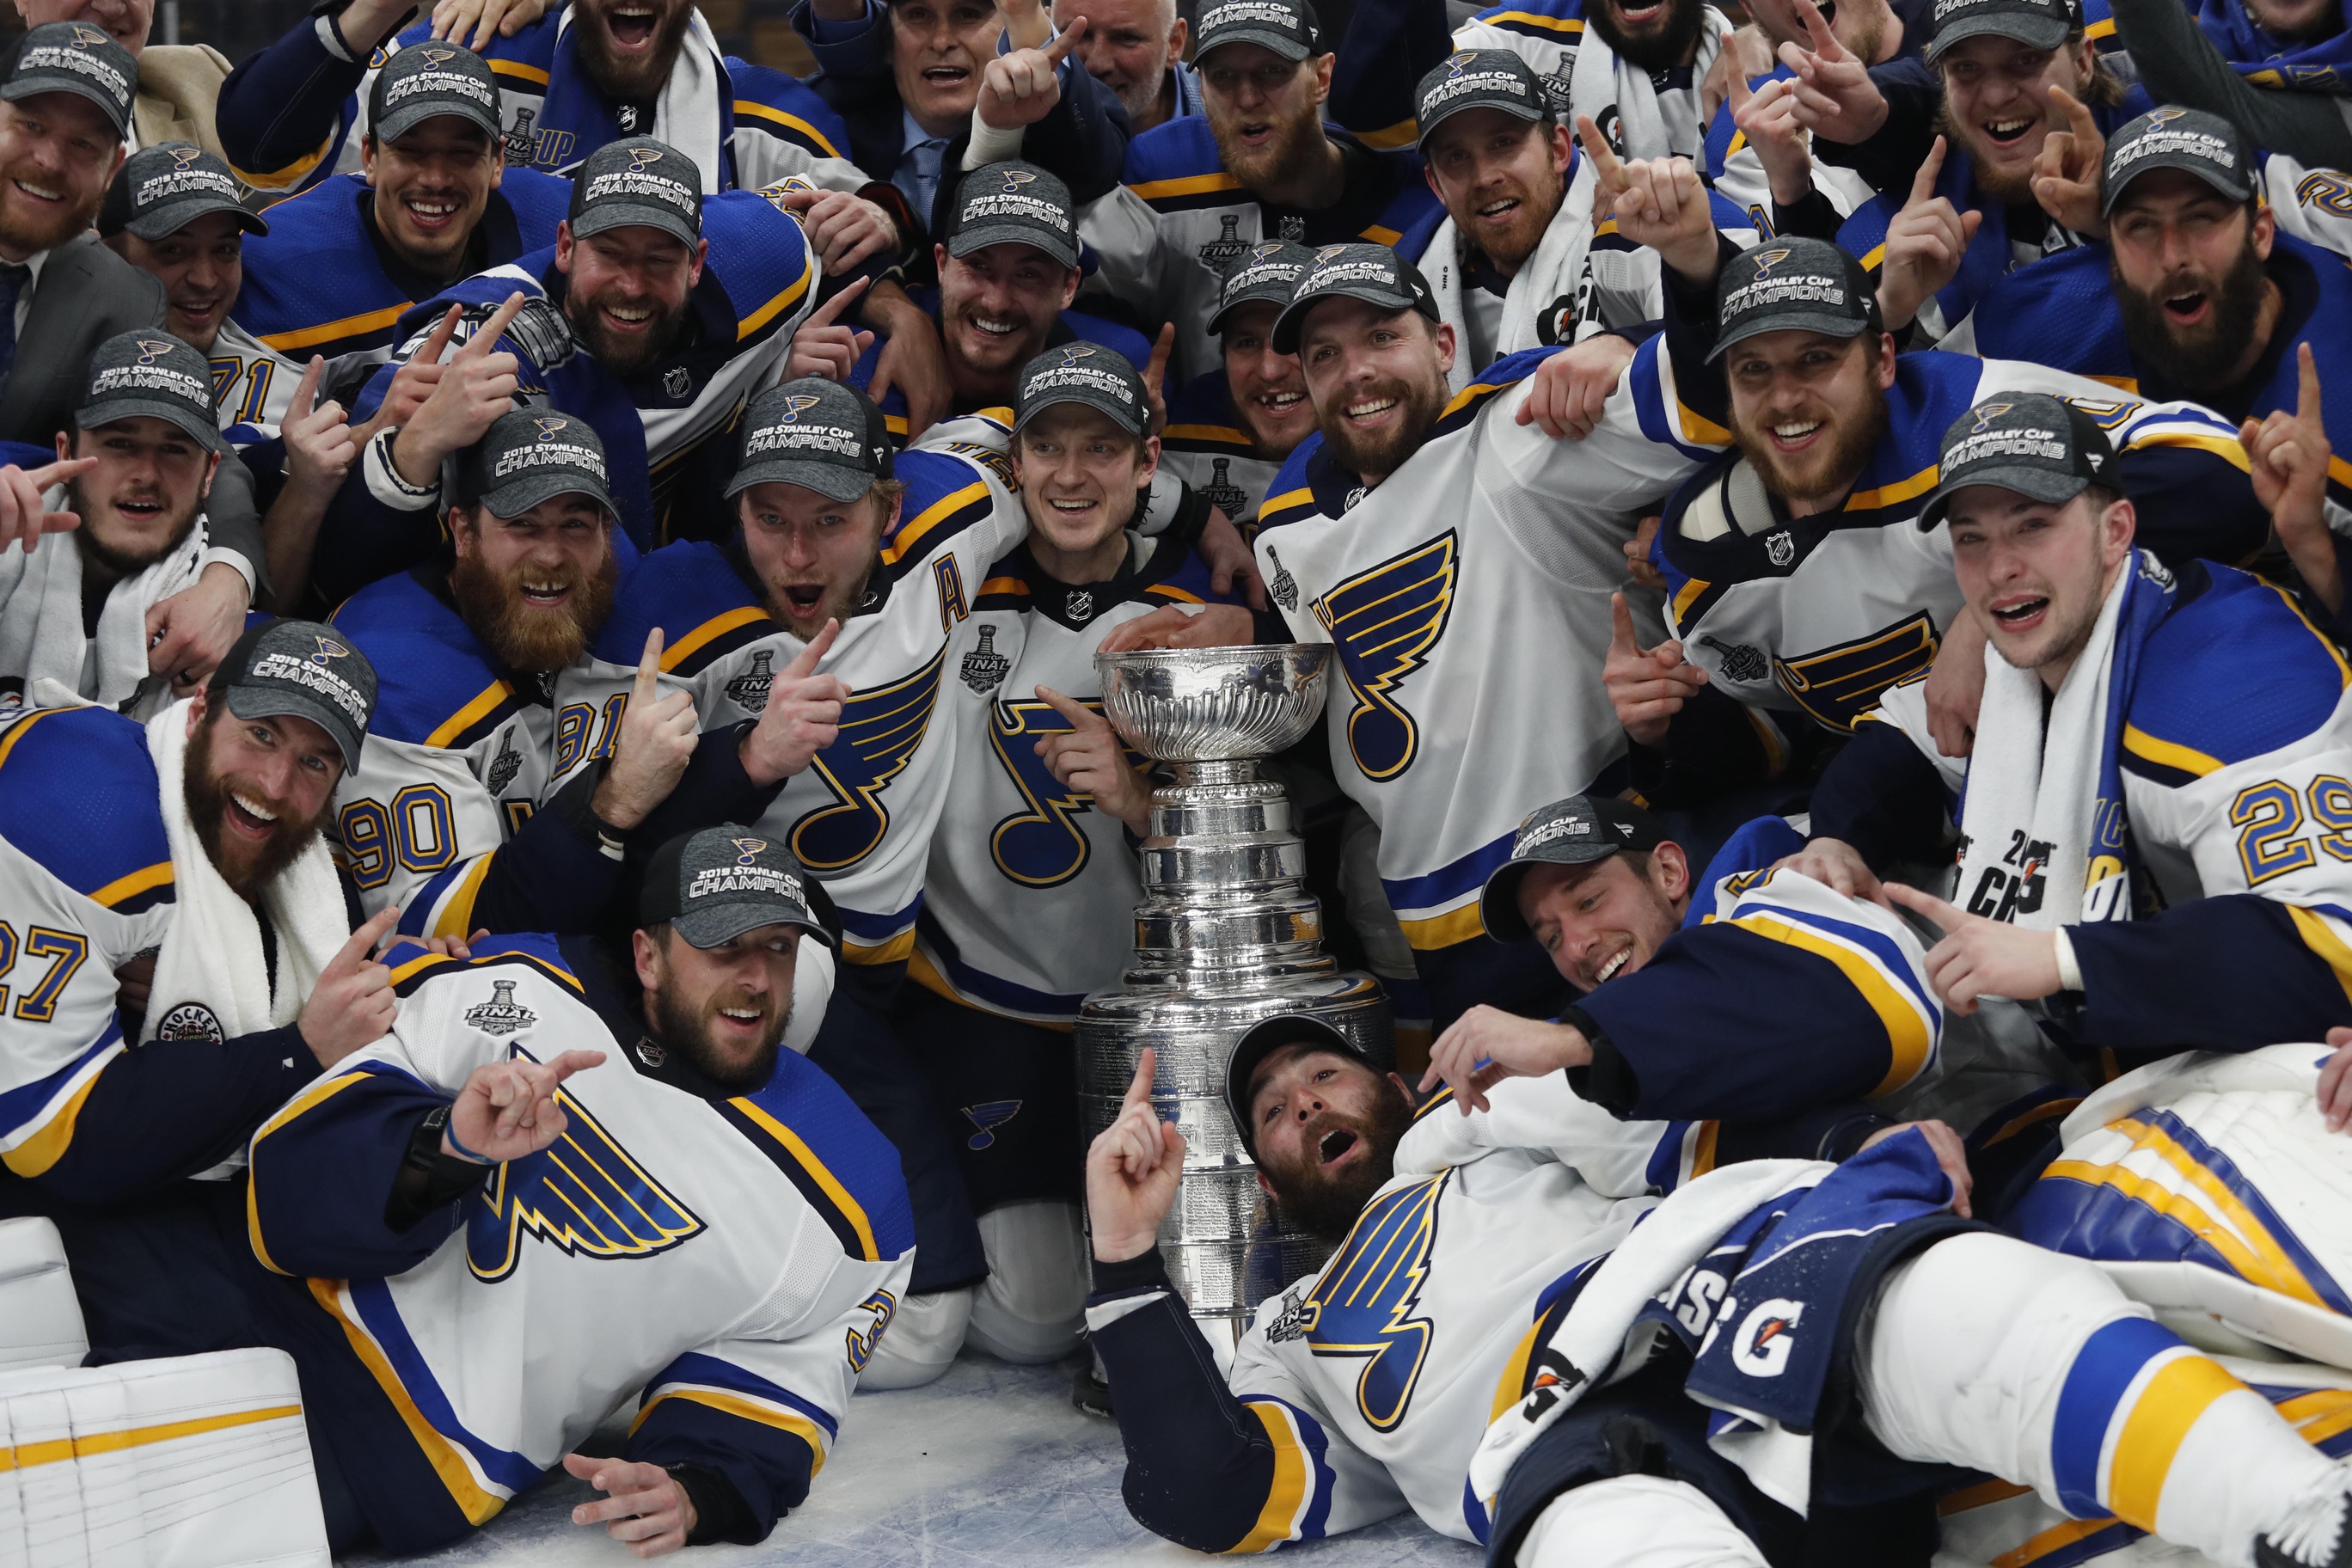 Finally St. Louis Blues claim first Stanley Cup with historic effort